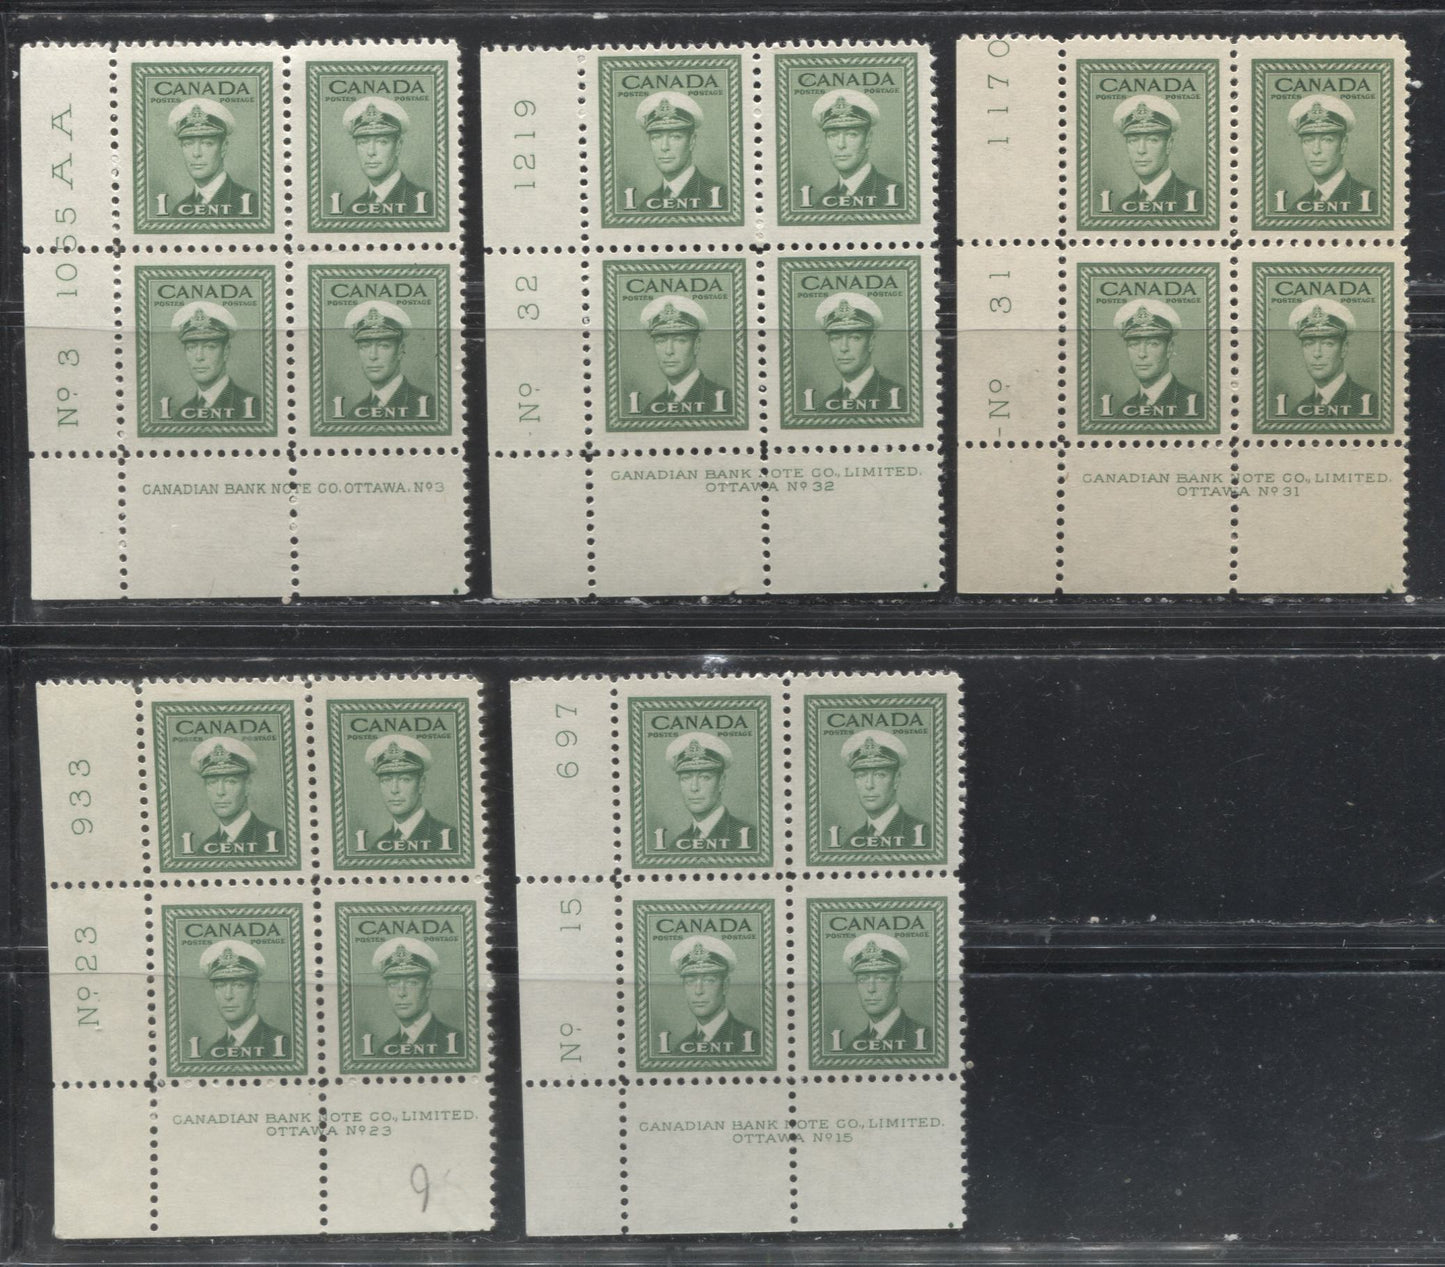 Lot 16 Canada #249 1c Green King George VI , 1942-1949 War Issue, Fine NH Plate 3, 15, 23, 31 & 32 Lower Left Blocks of 4 Plate Dot at LR, Various Number Spacings